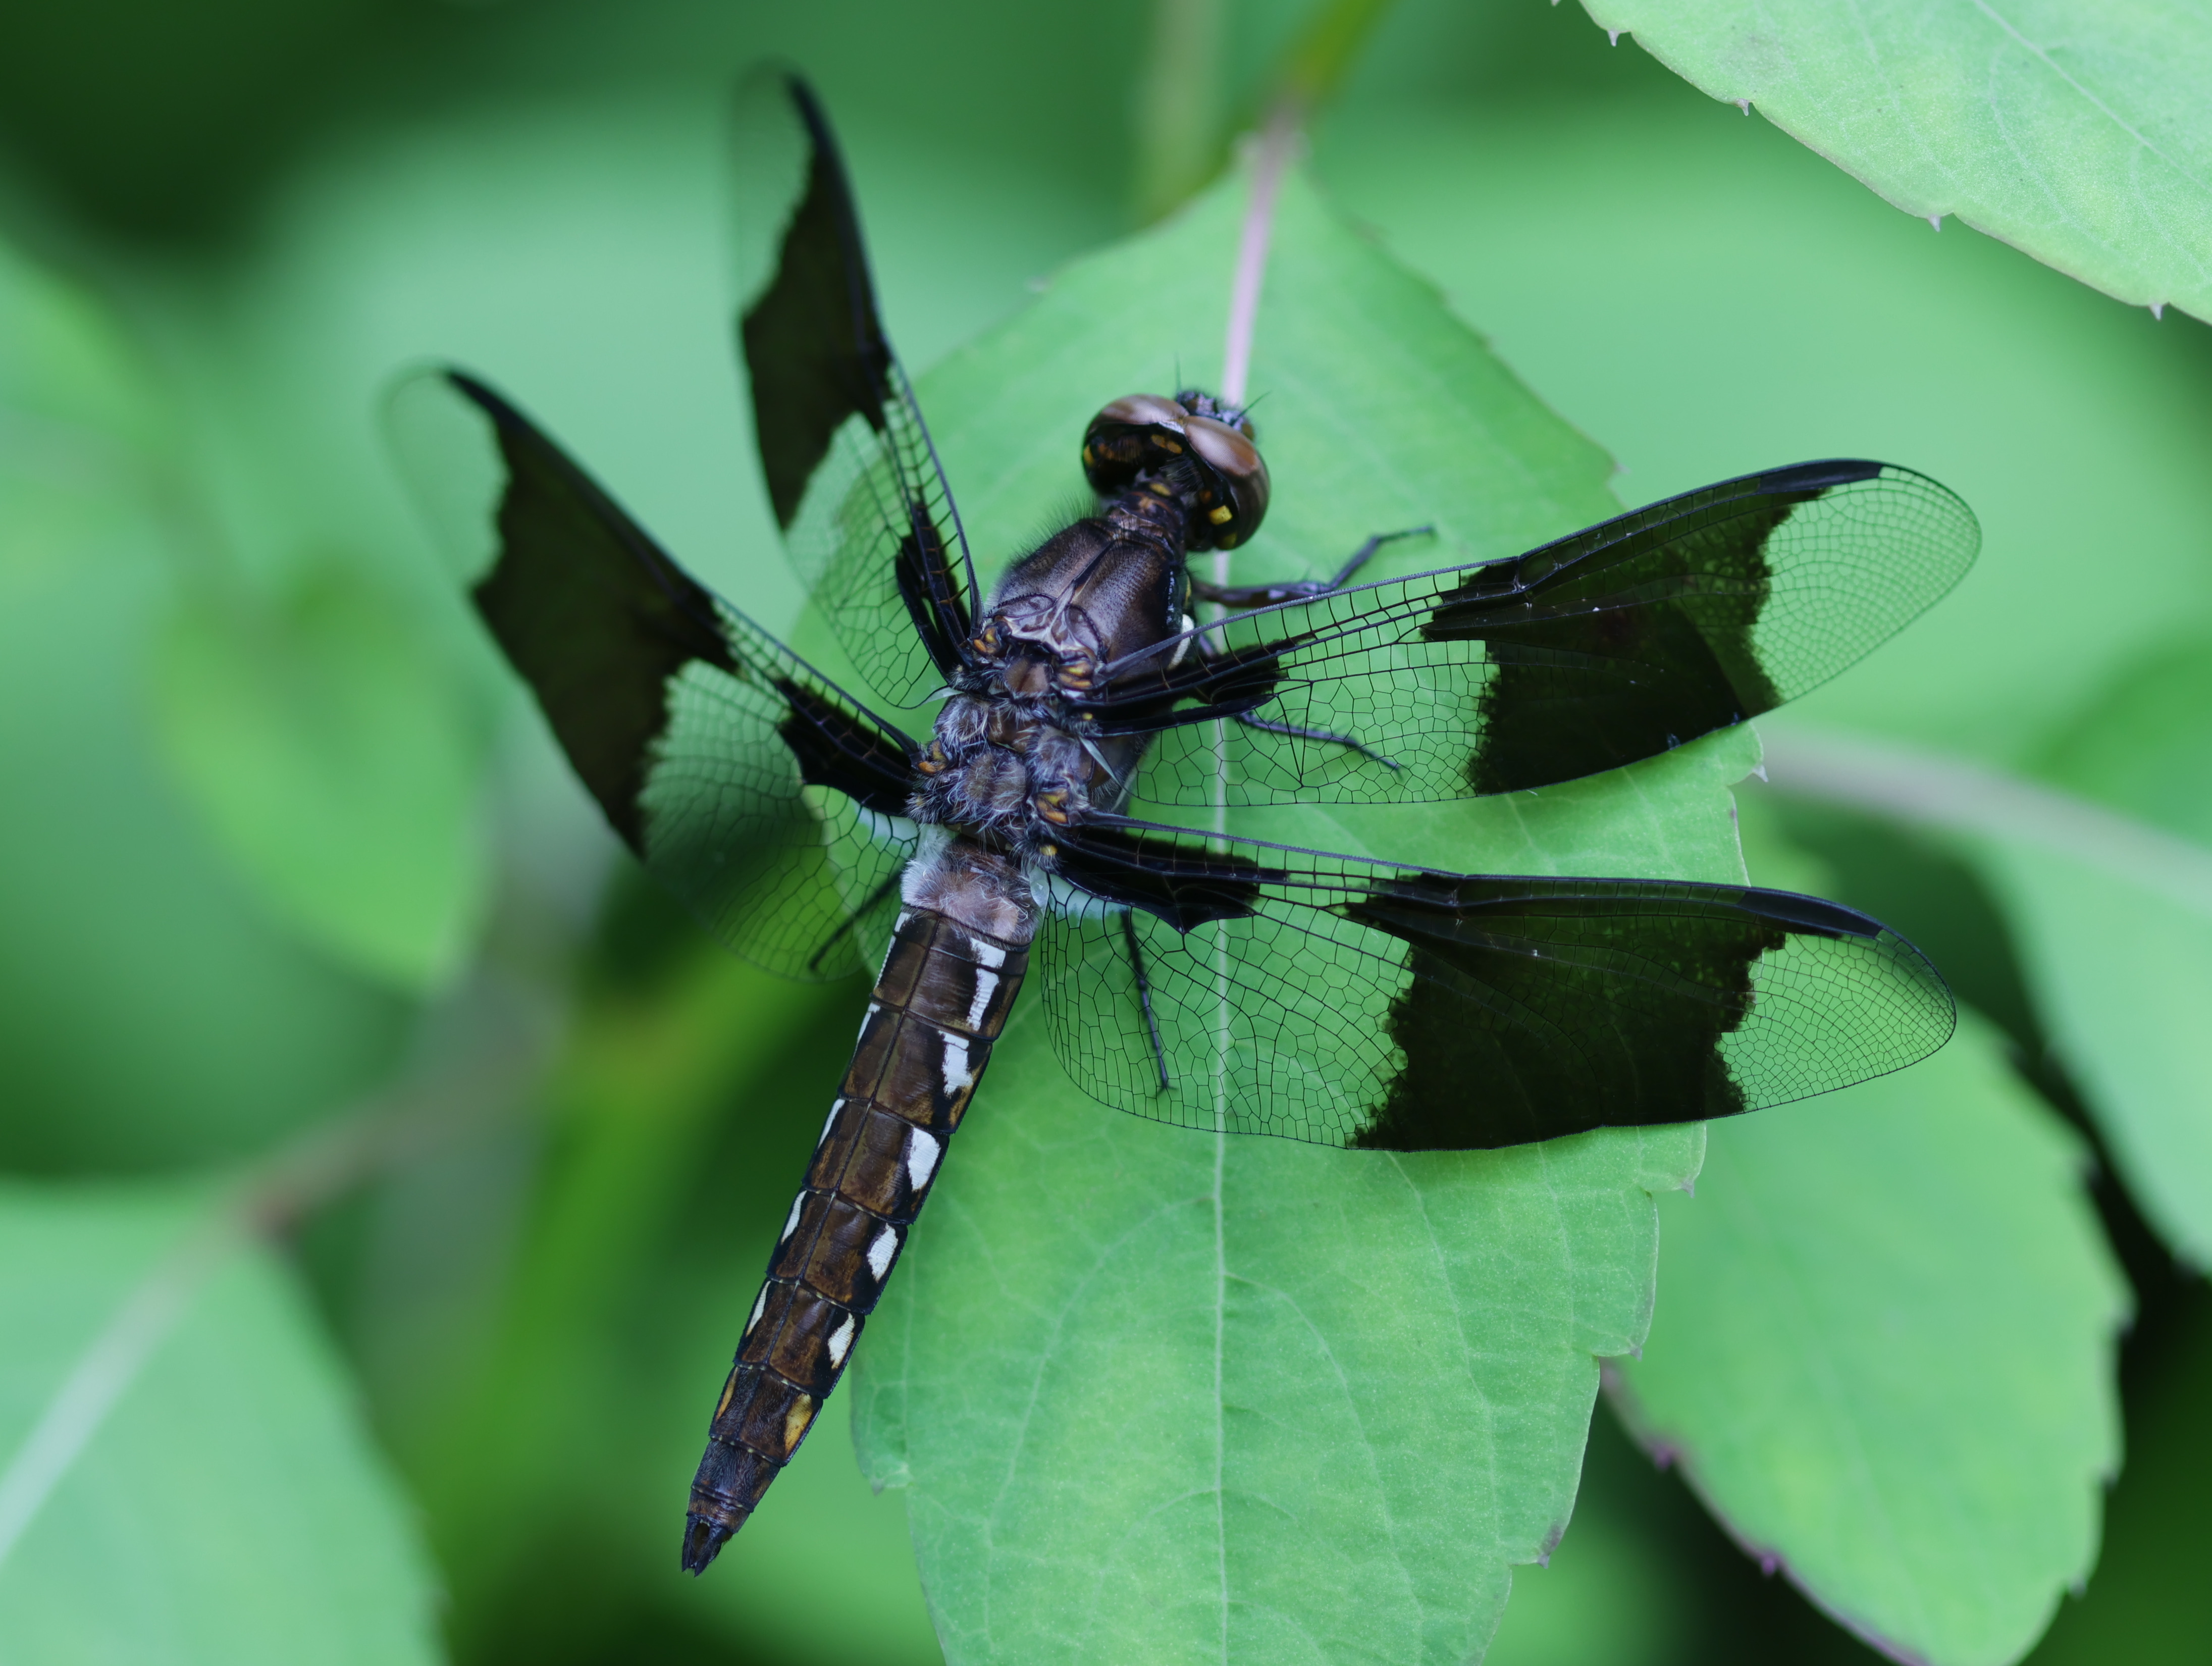 black-and-blue dragonfly perched on leaf